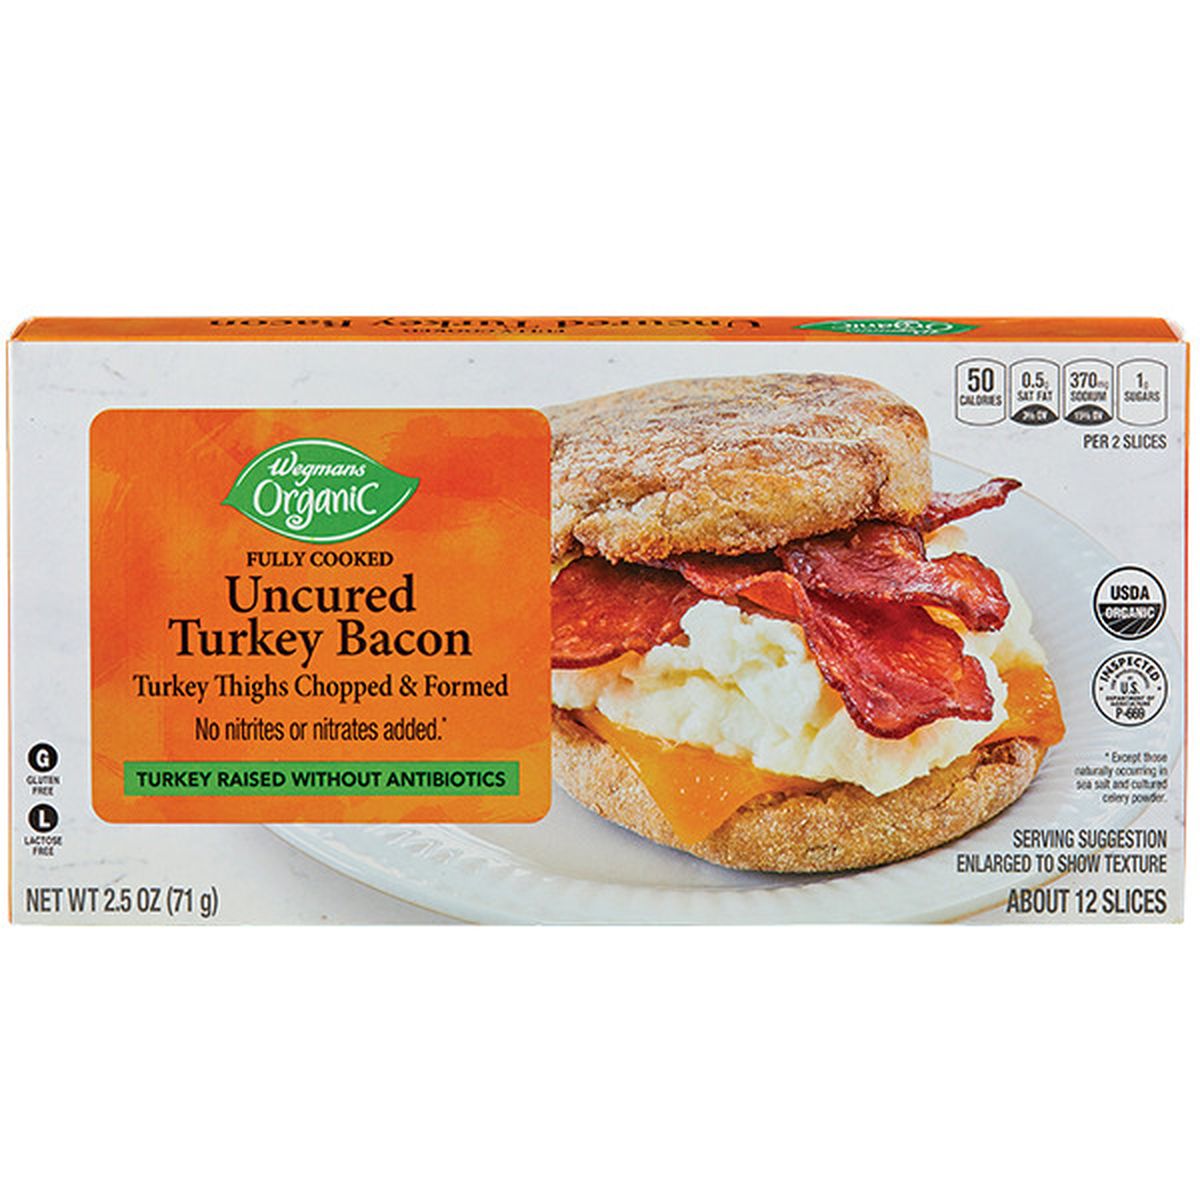 Calories in Wegmans Organic Fully Cooked Uncured Turkey Bacon